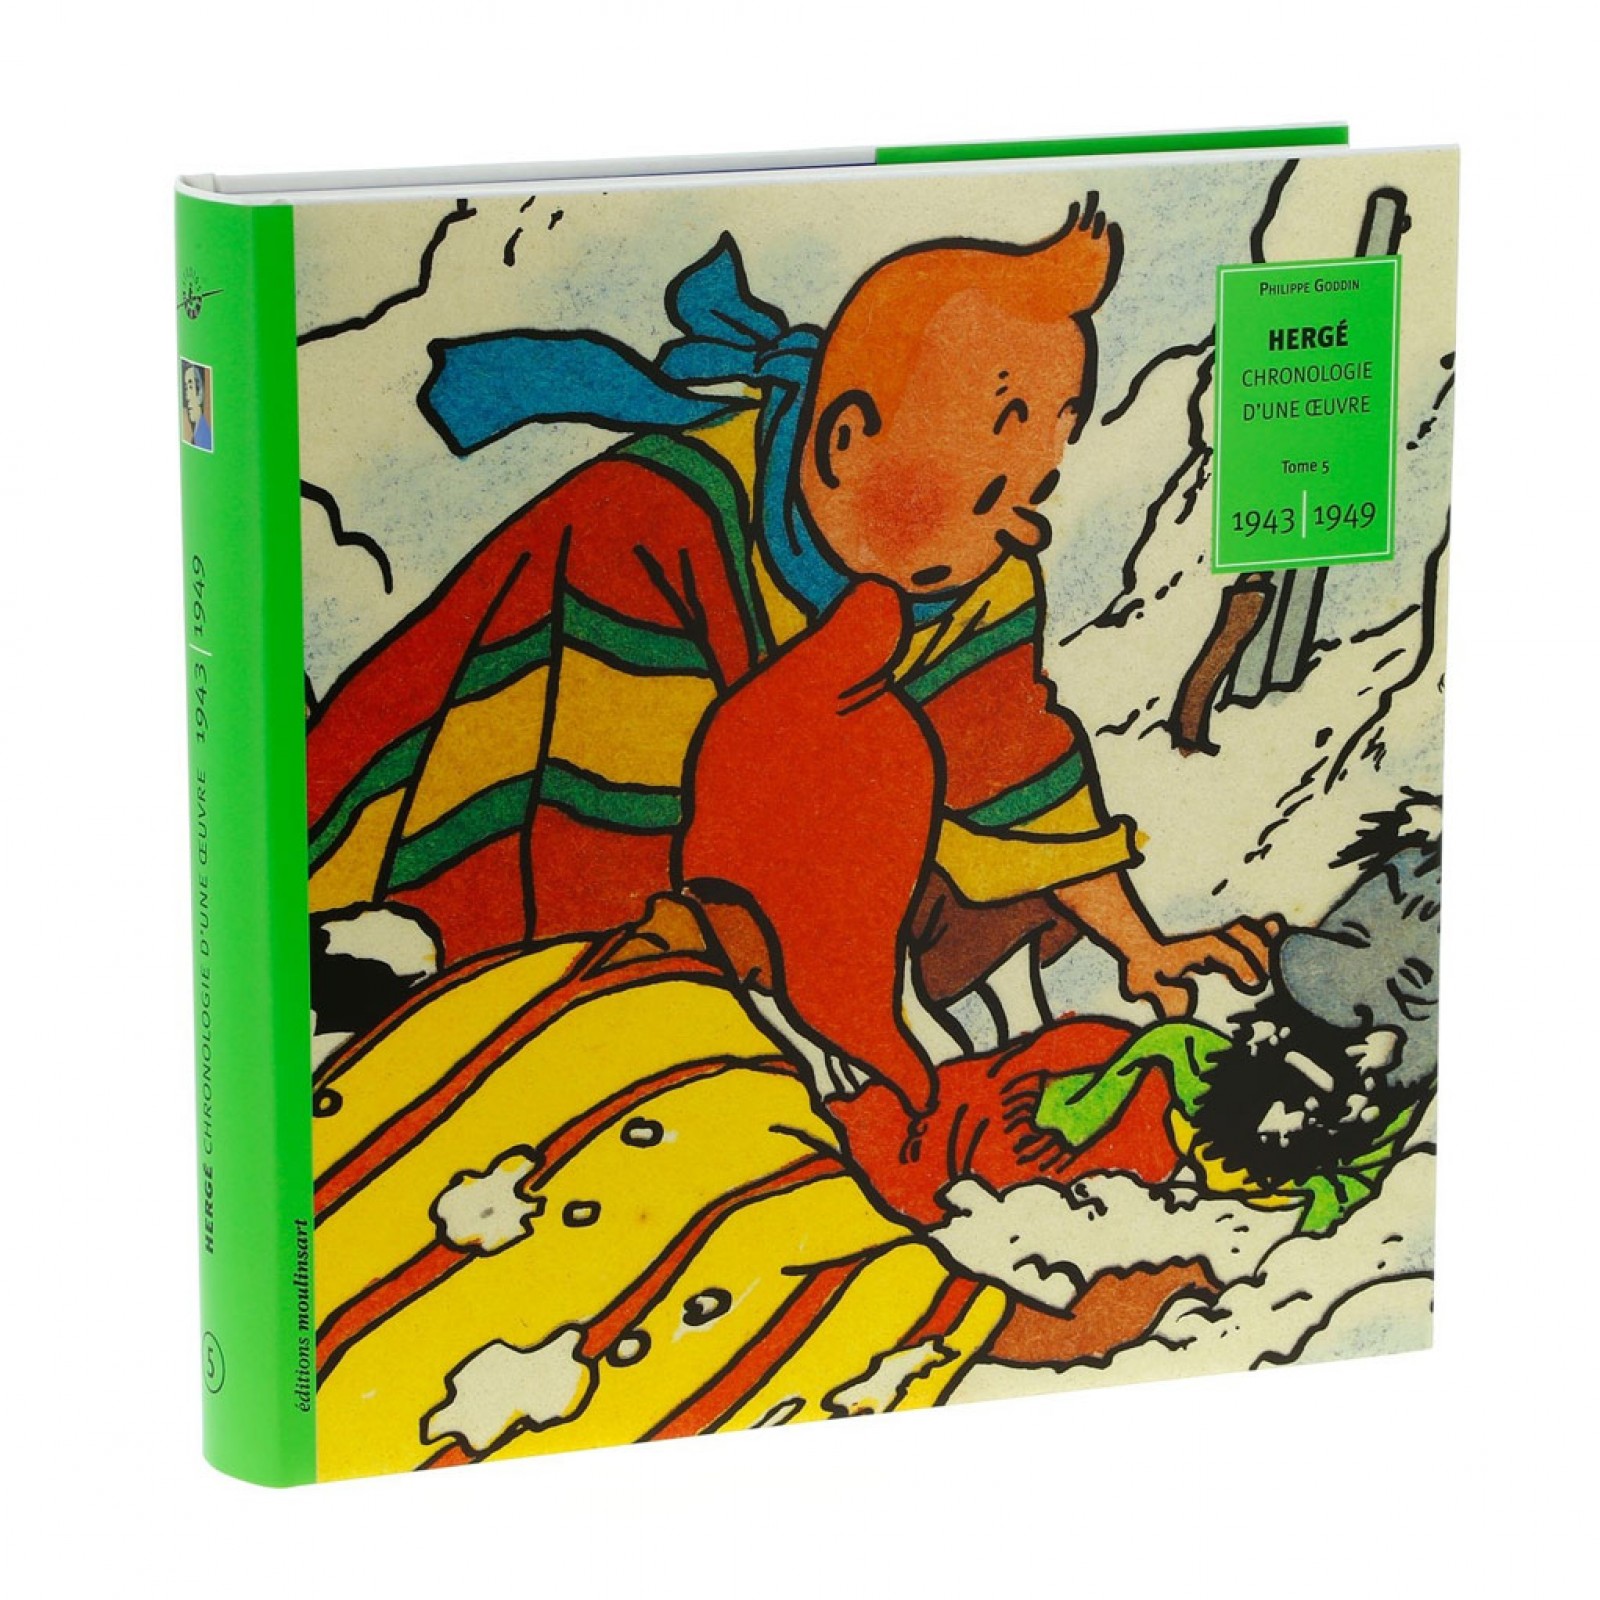 Album Tintin Chronologie d'une oeuvre vol. 5 (french Edition) -  Coffee-Table books